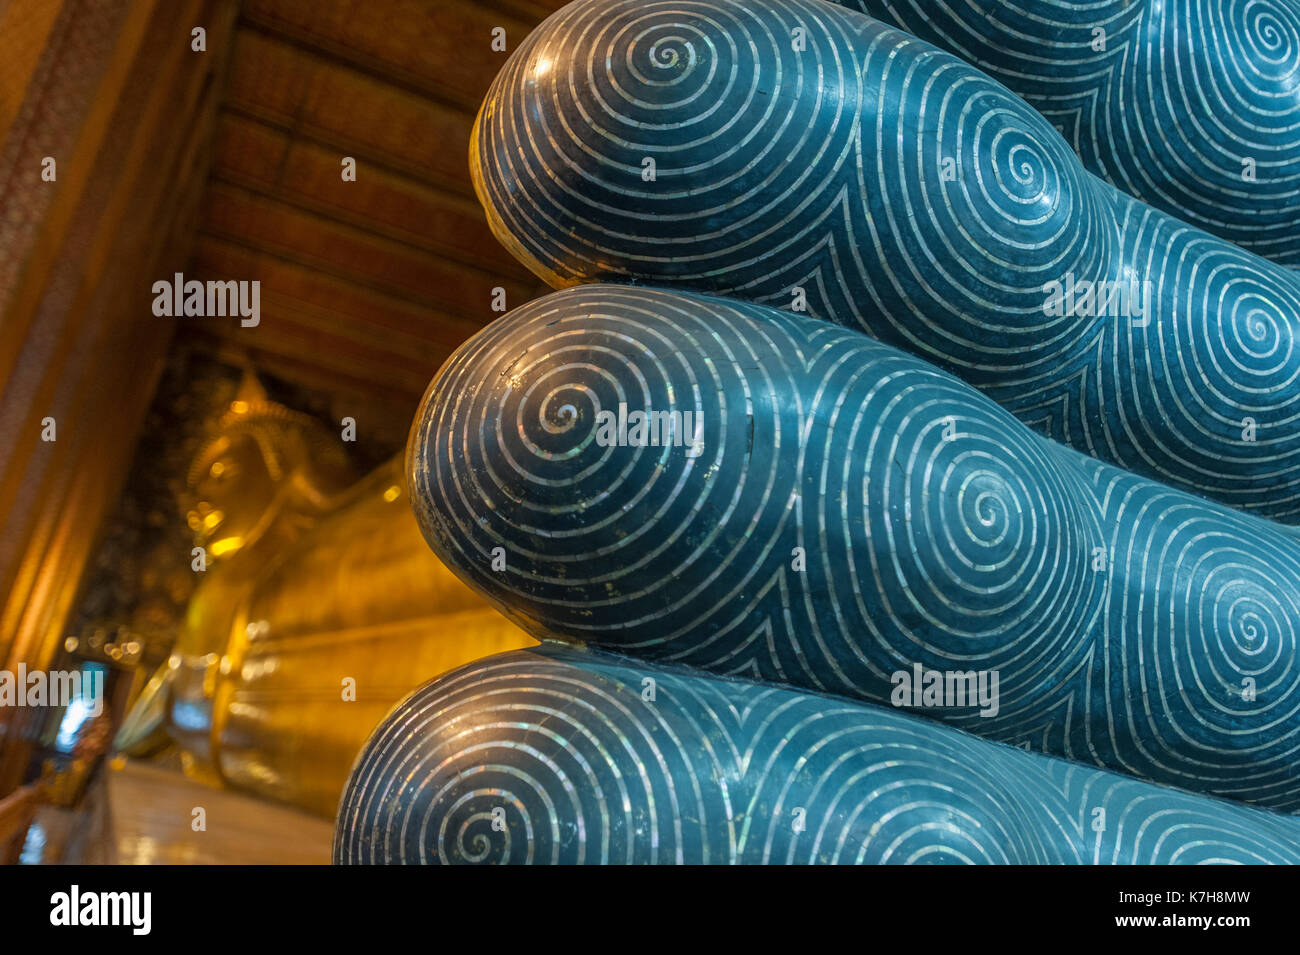 Spiral patterns on the toes of the Reclining Buddha in the temple at Wat Phra Chetuphon (Wat Pho). Phra Nakhon District, Bangkok, Thailand Stock Photo